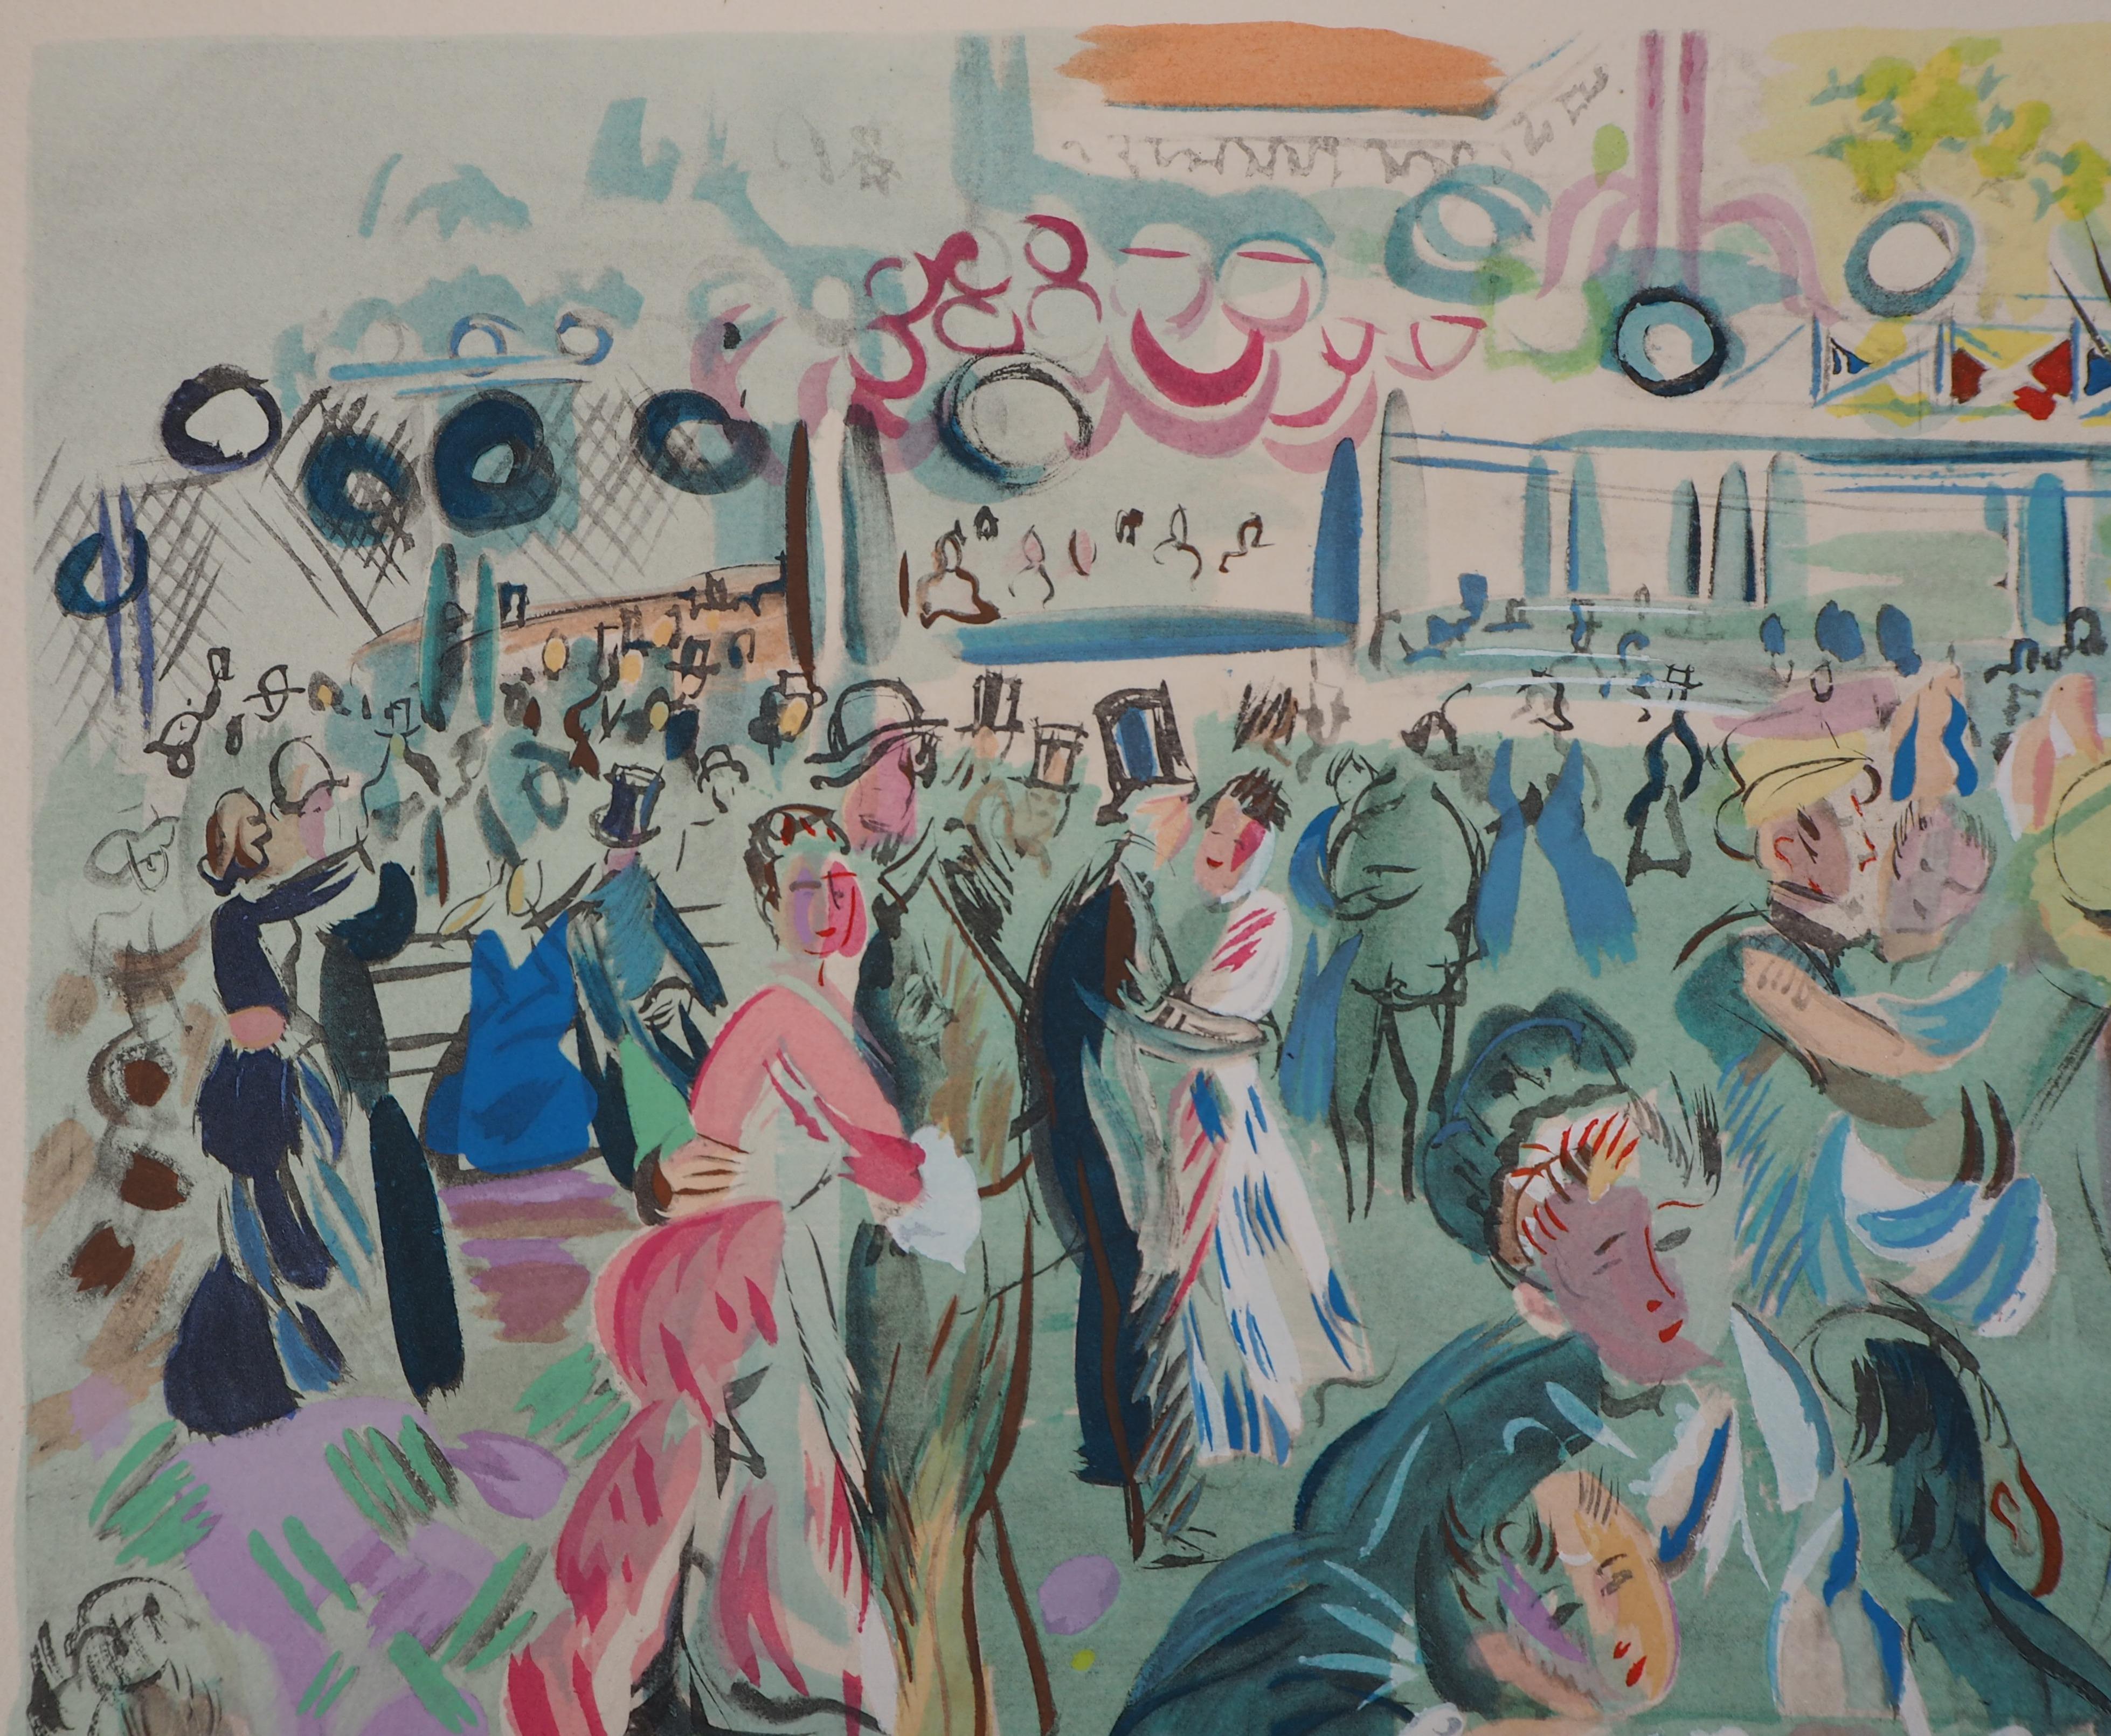 Tribute to Renoir : Dancing Cafe - Original Lithograph - Gray Figurative Print by Raoul Dufy